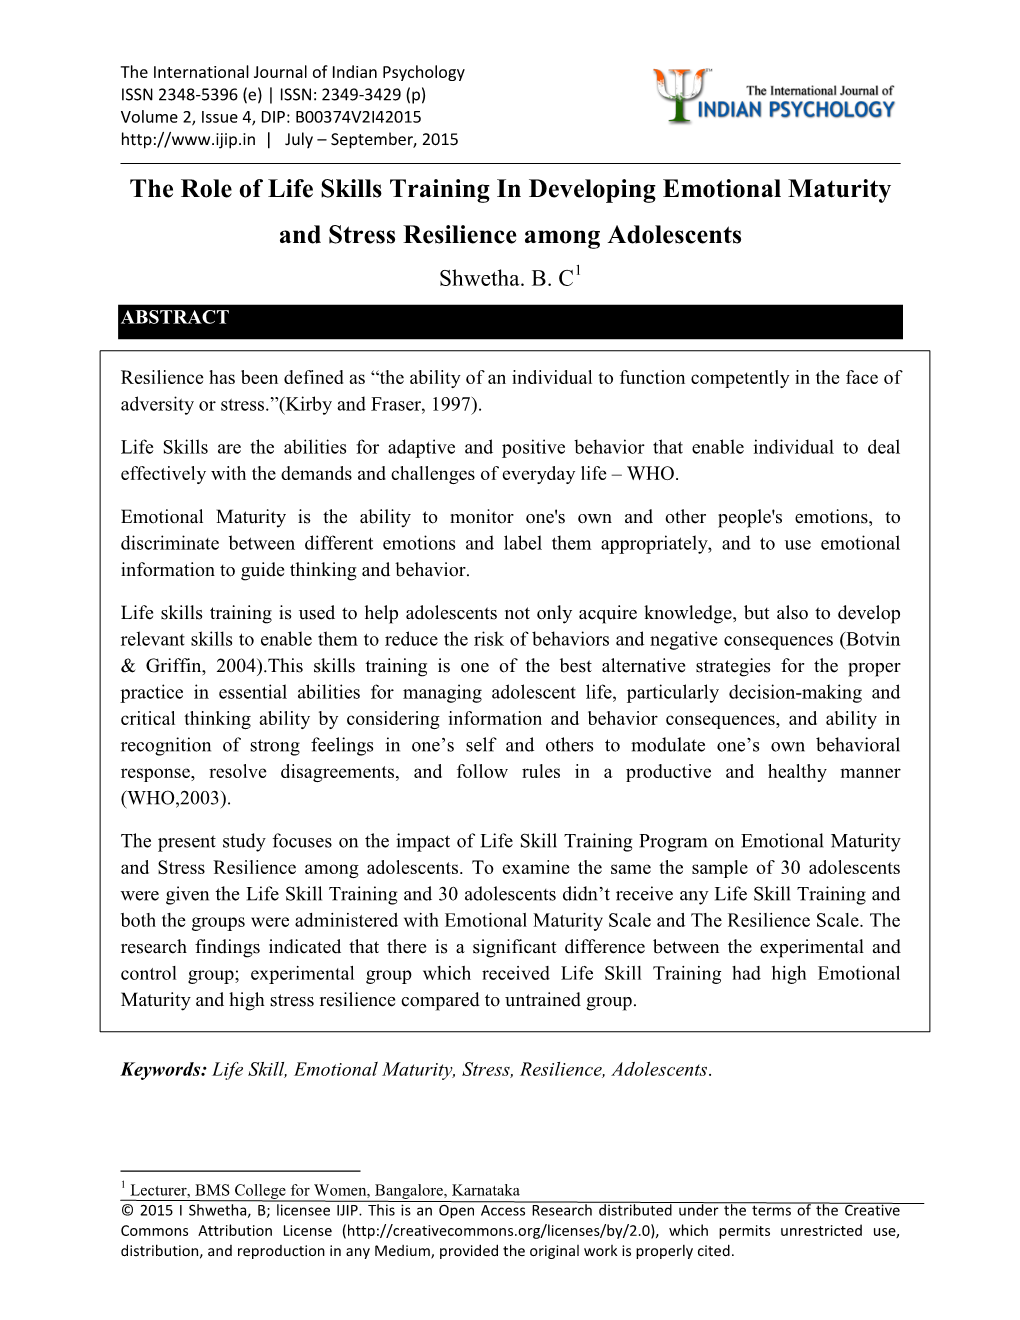 The Role of Life Skills Training in Developing Emotional Maturity and Stress Resilience Among Adolescents Shwetha